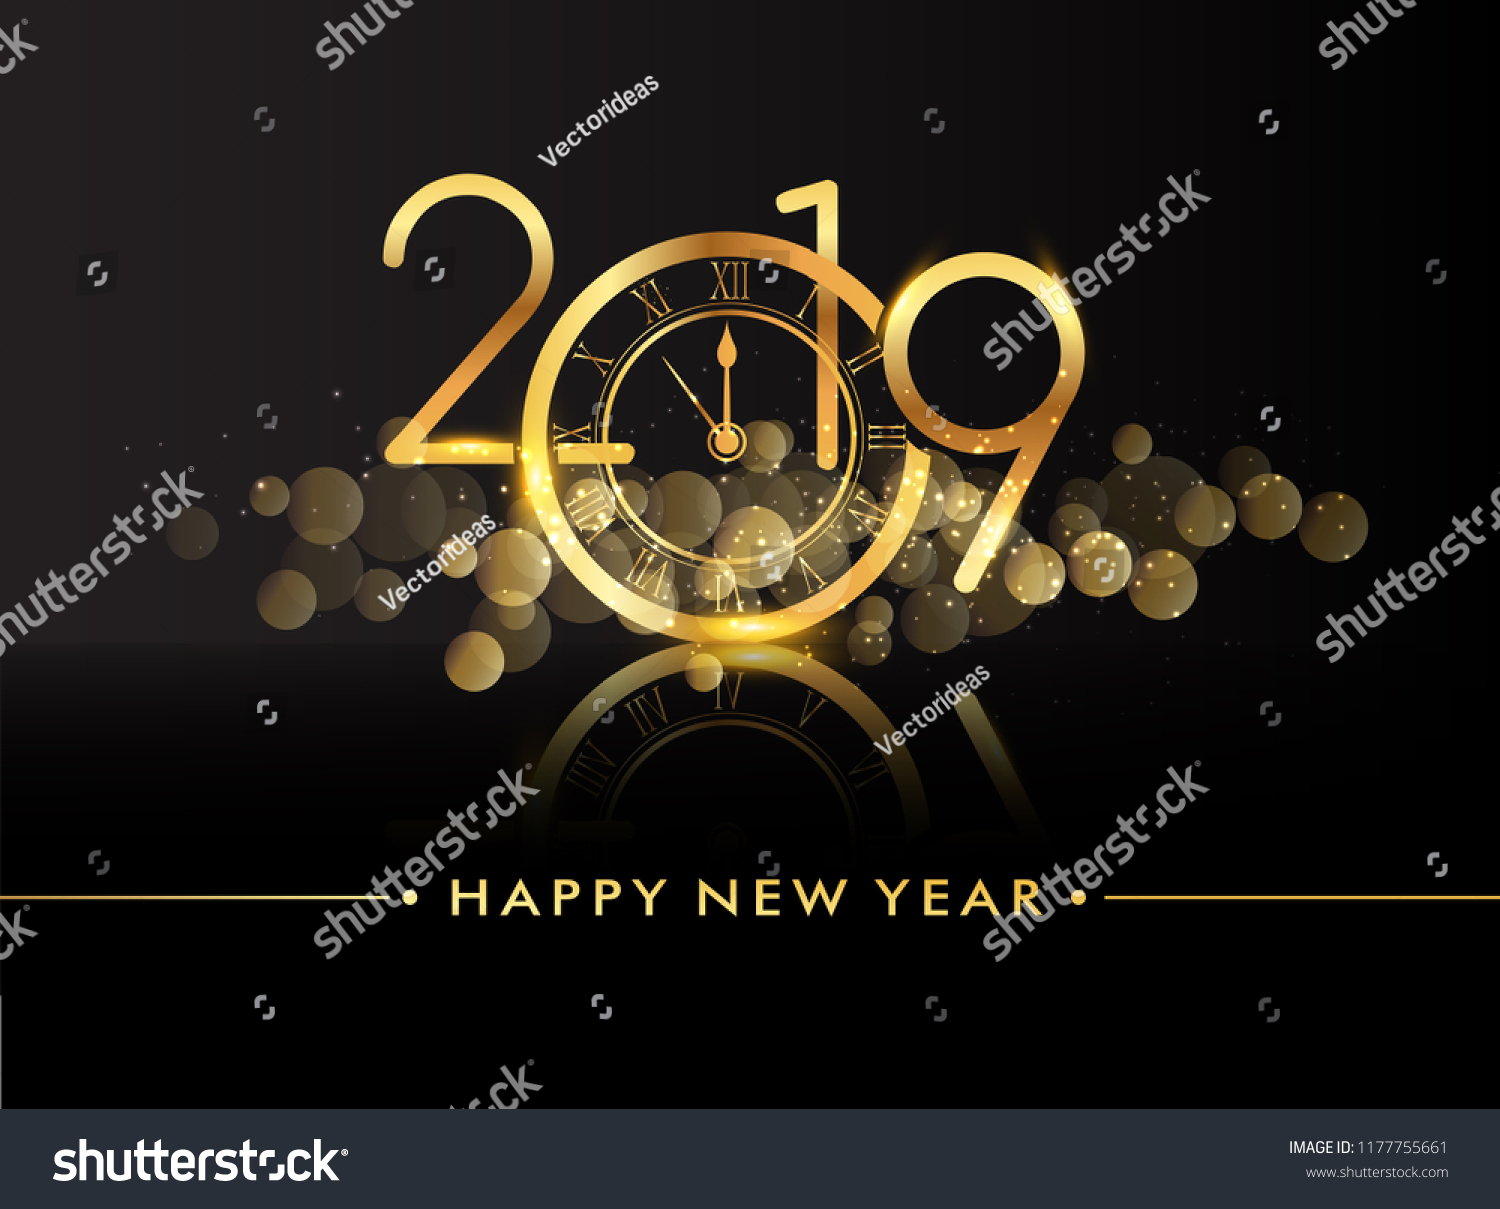 Happy New Year 2019 with glitter isolated on black background, text design gold colored, vector elements for calendar and greeting card. #1177755661